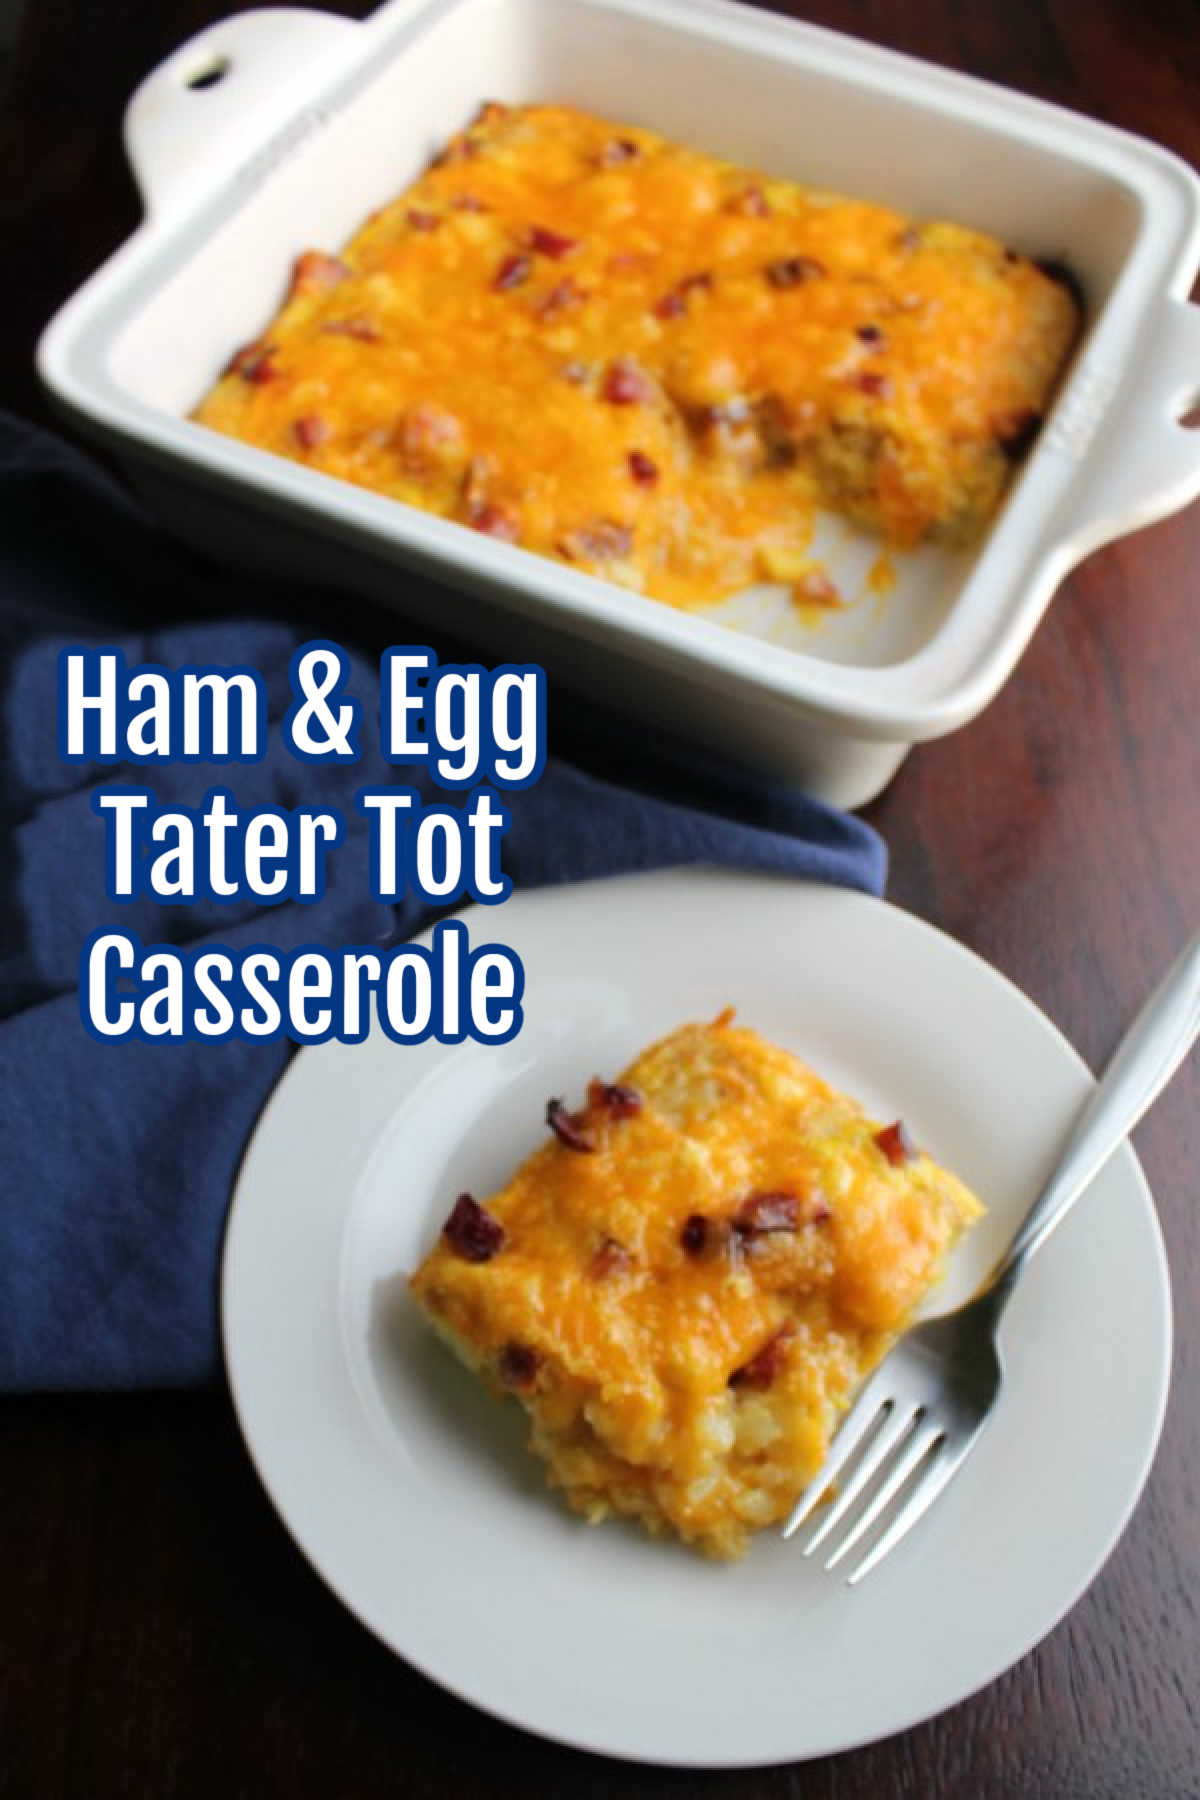 Tater tot breakfast casserole is a cheesy blend of eggs, ham, and potatoes. It is super quick and easy to put together and bakes up to make a tasty meal.